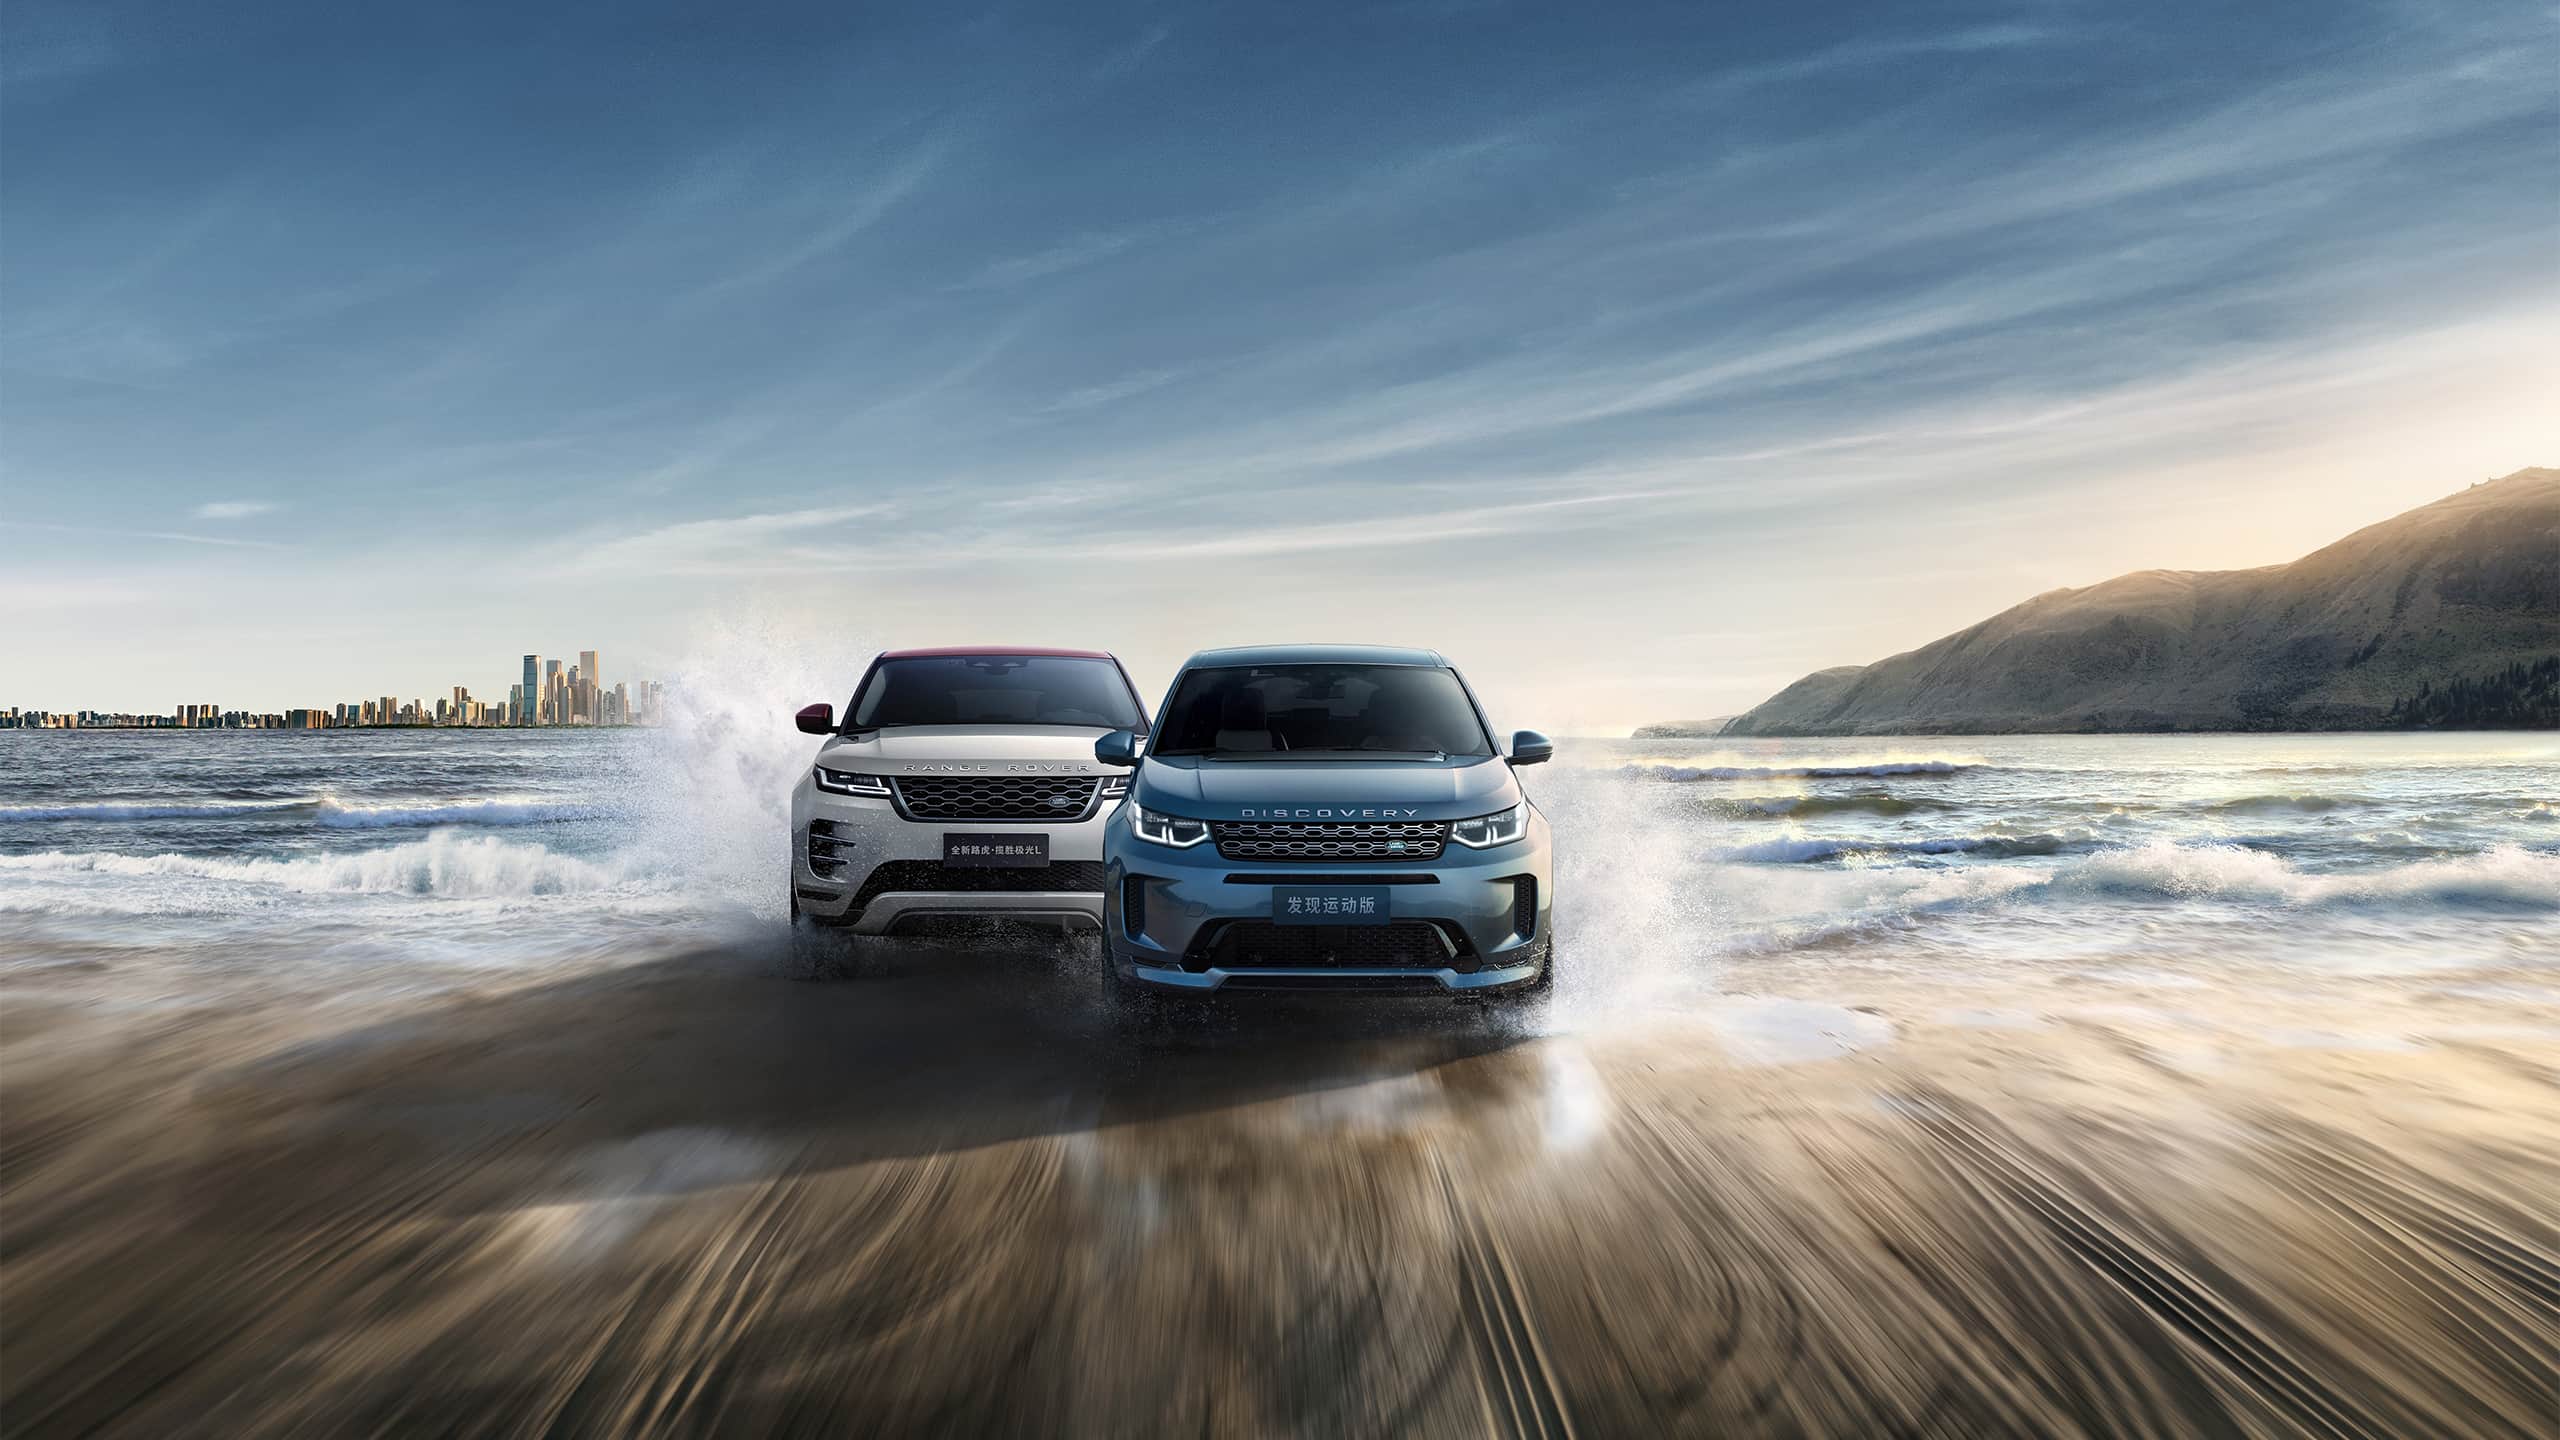 Range Rover Evoque L and Land Rover Discovery Sport